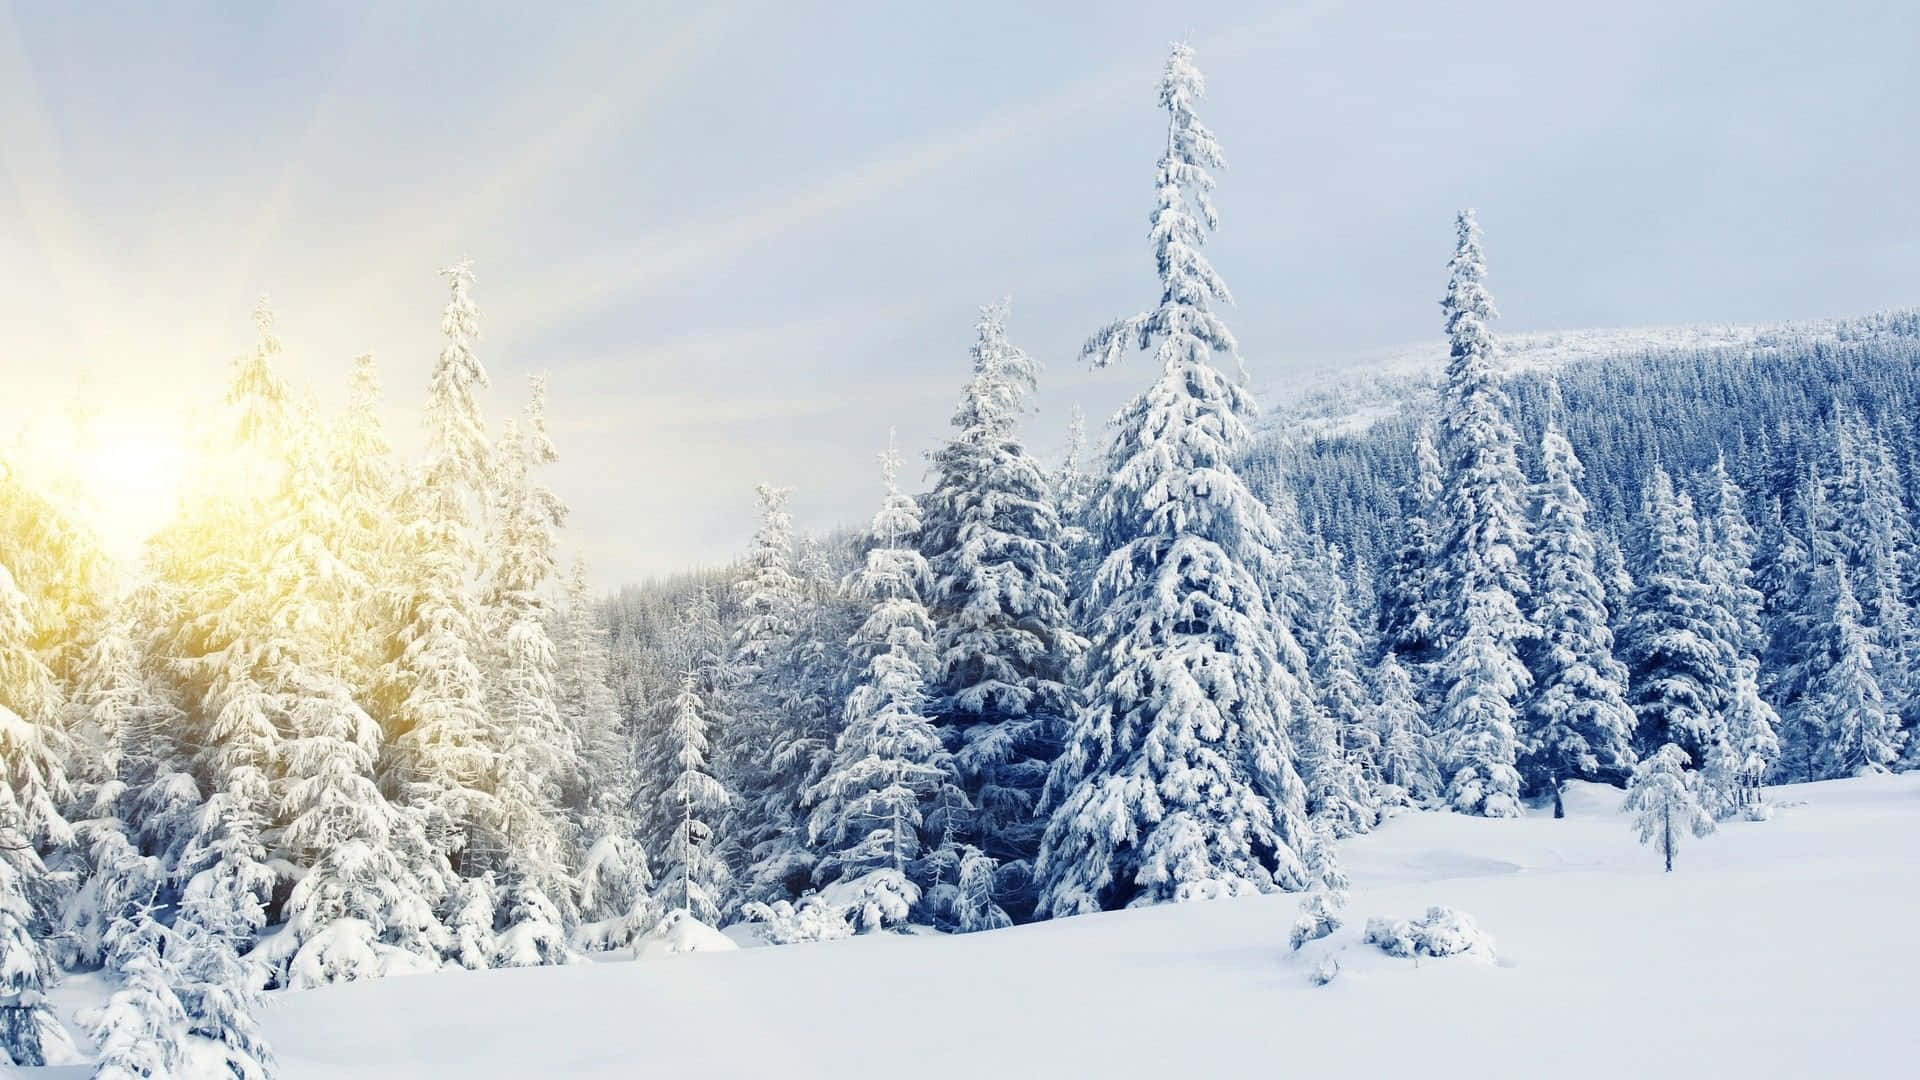 Snow-covered Trees in a Winter Wonderland Wallpaper